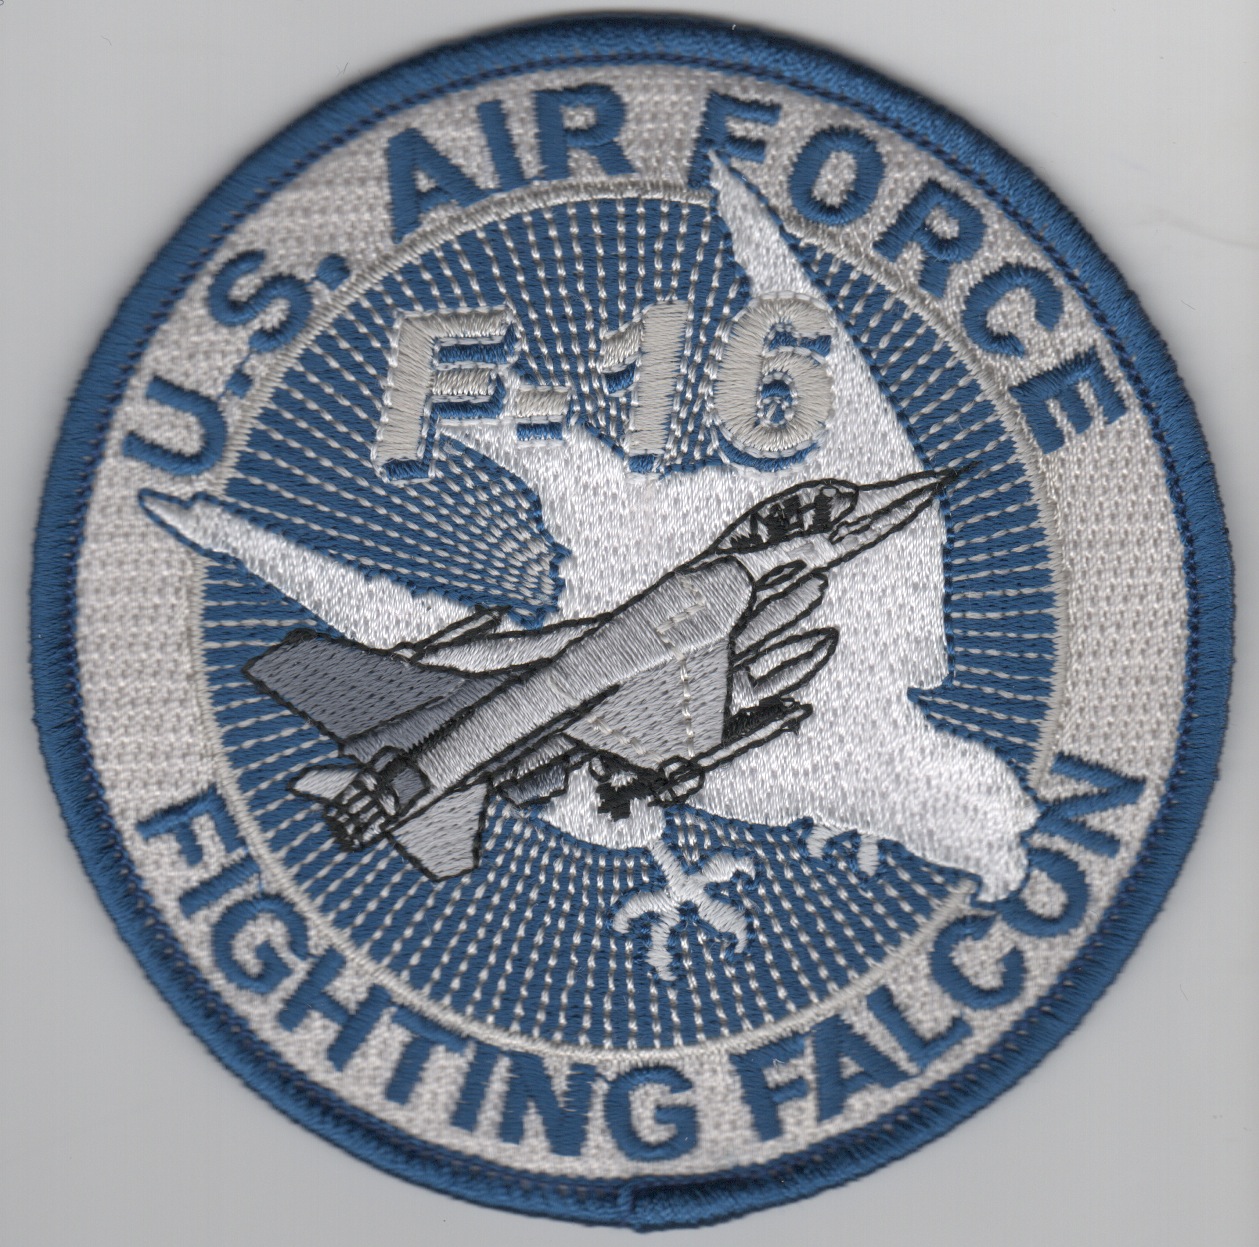 F-16 Blue/Silver Aircraft Patch